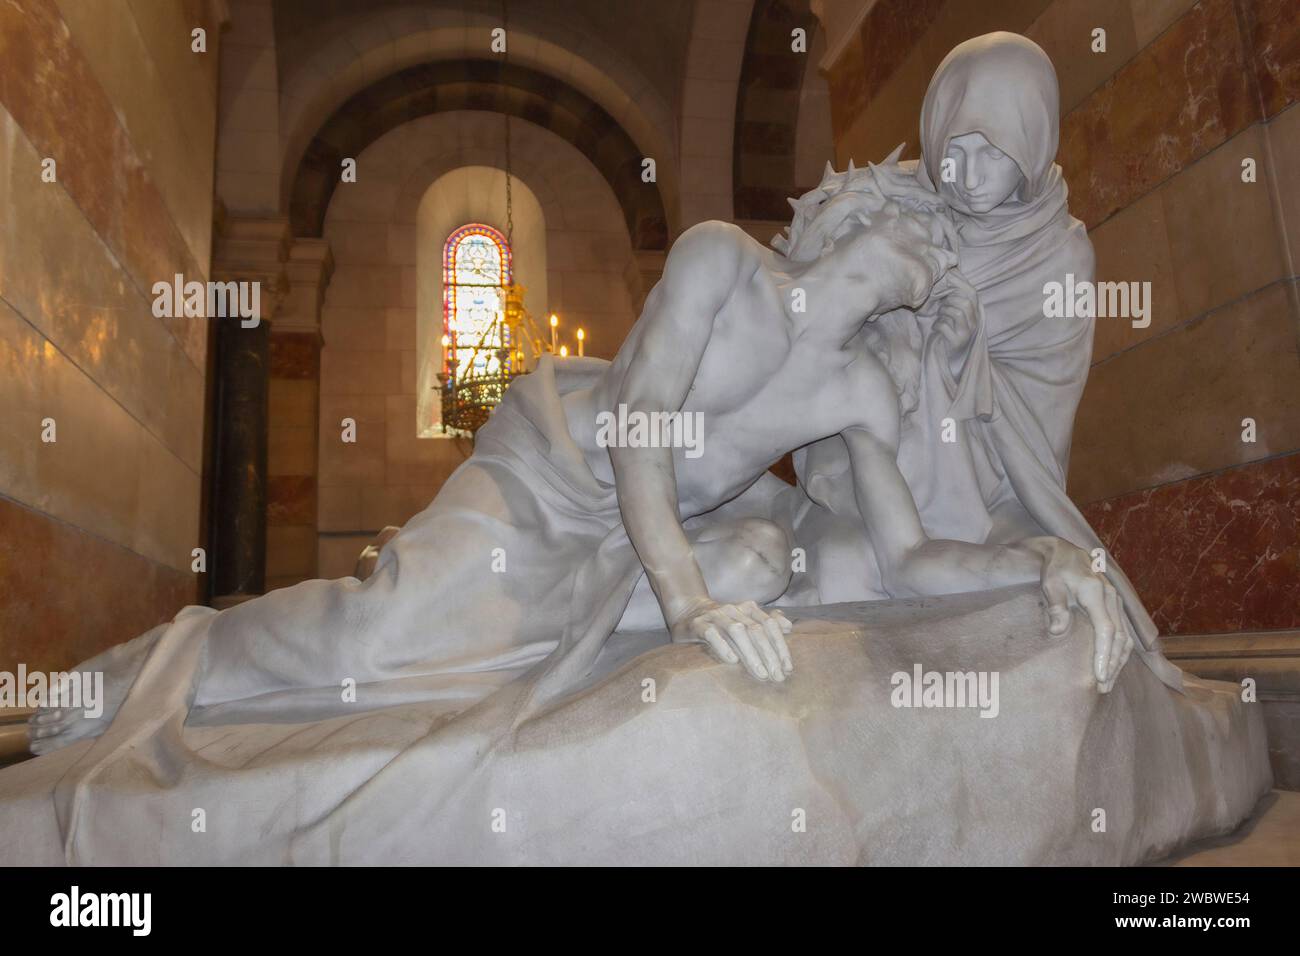 Marseille Cathedral, Marseille, France.  Statue of Mary and Jesus after the crucifixion. Stock Photo